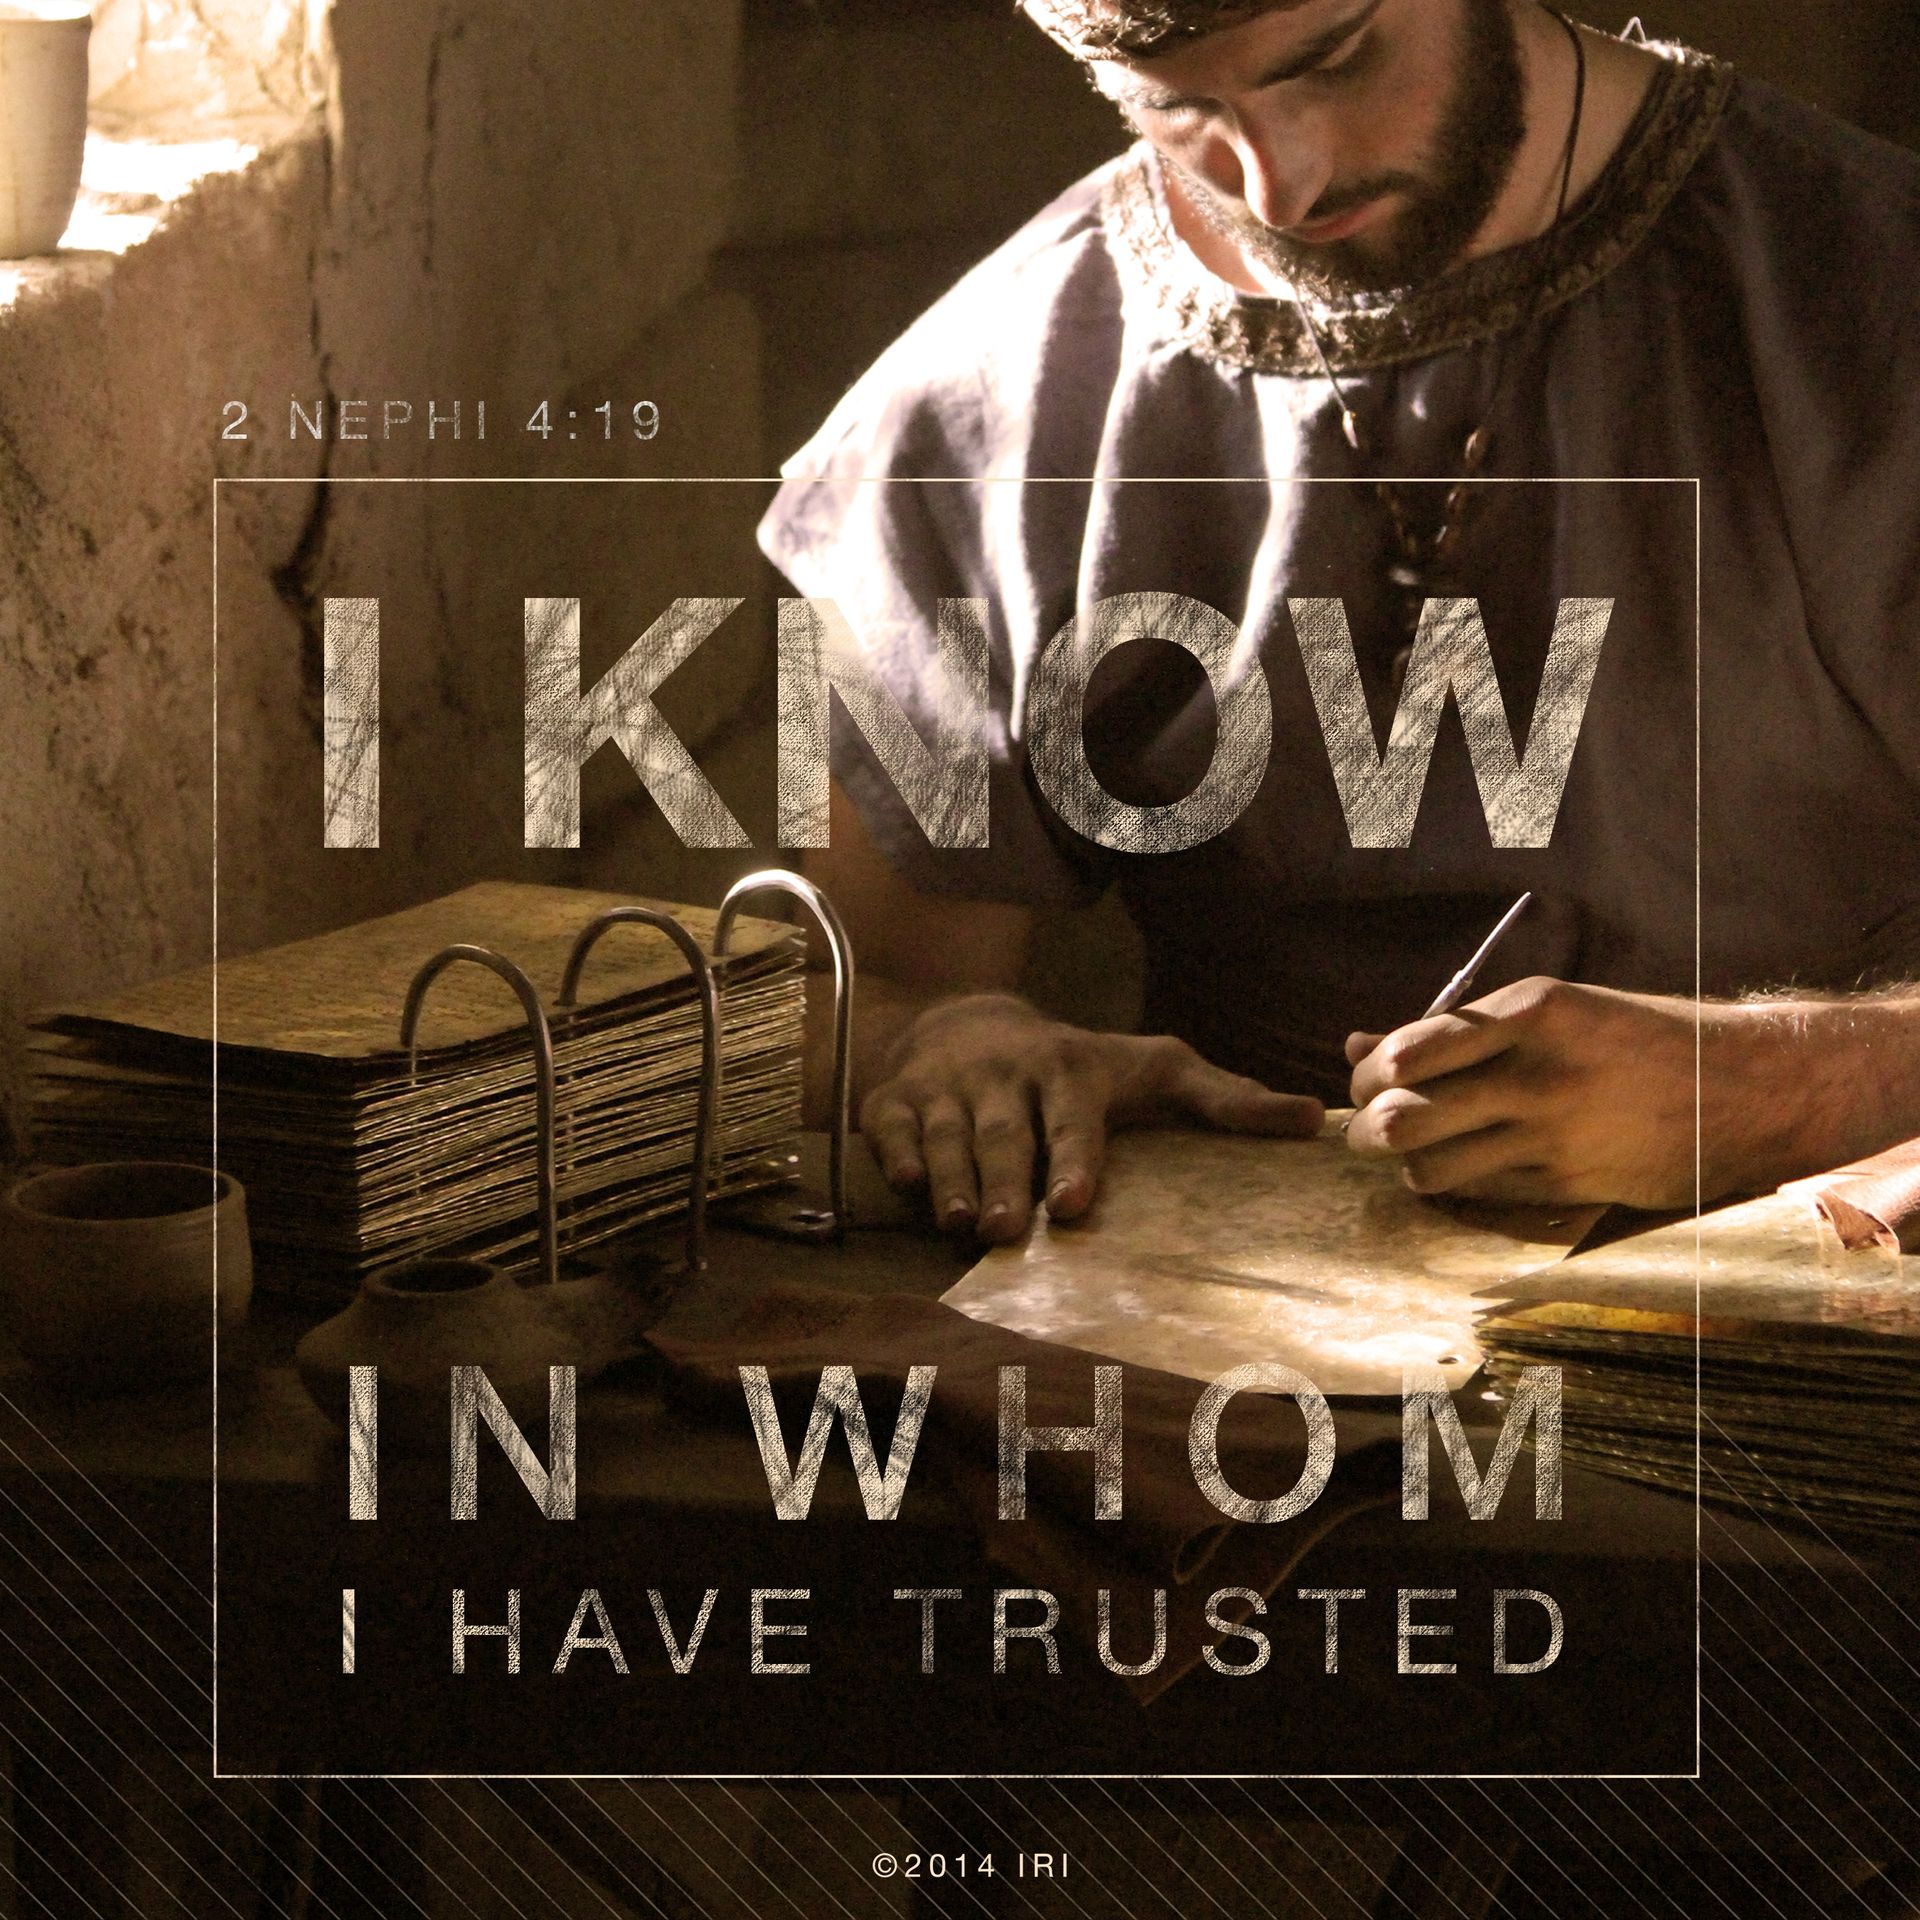 “I know in whom I have trusted.”—2 Nephi 4:19 © undefined ipCode 1.